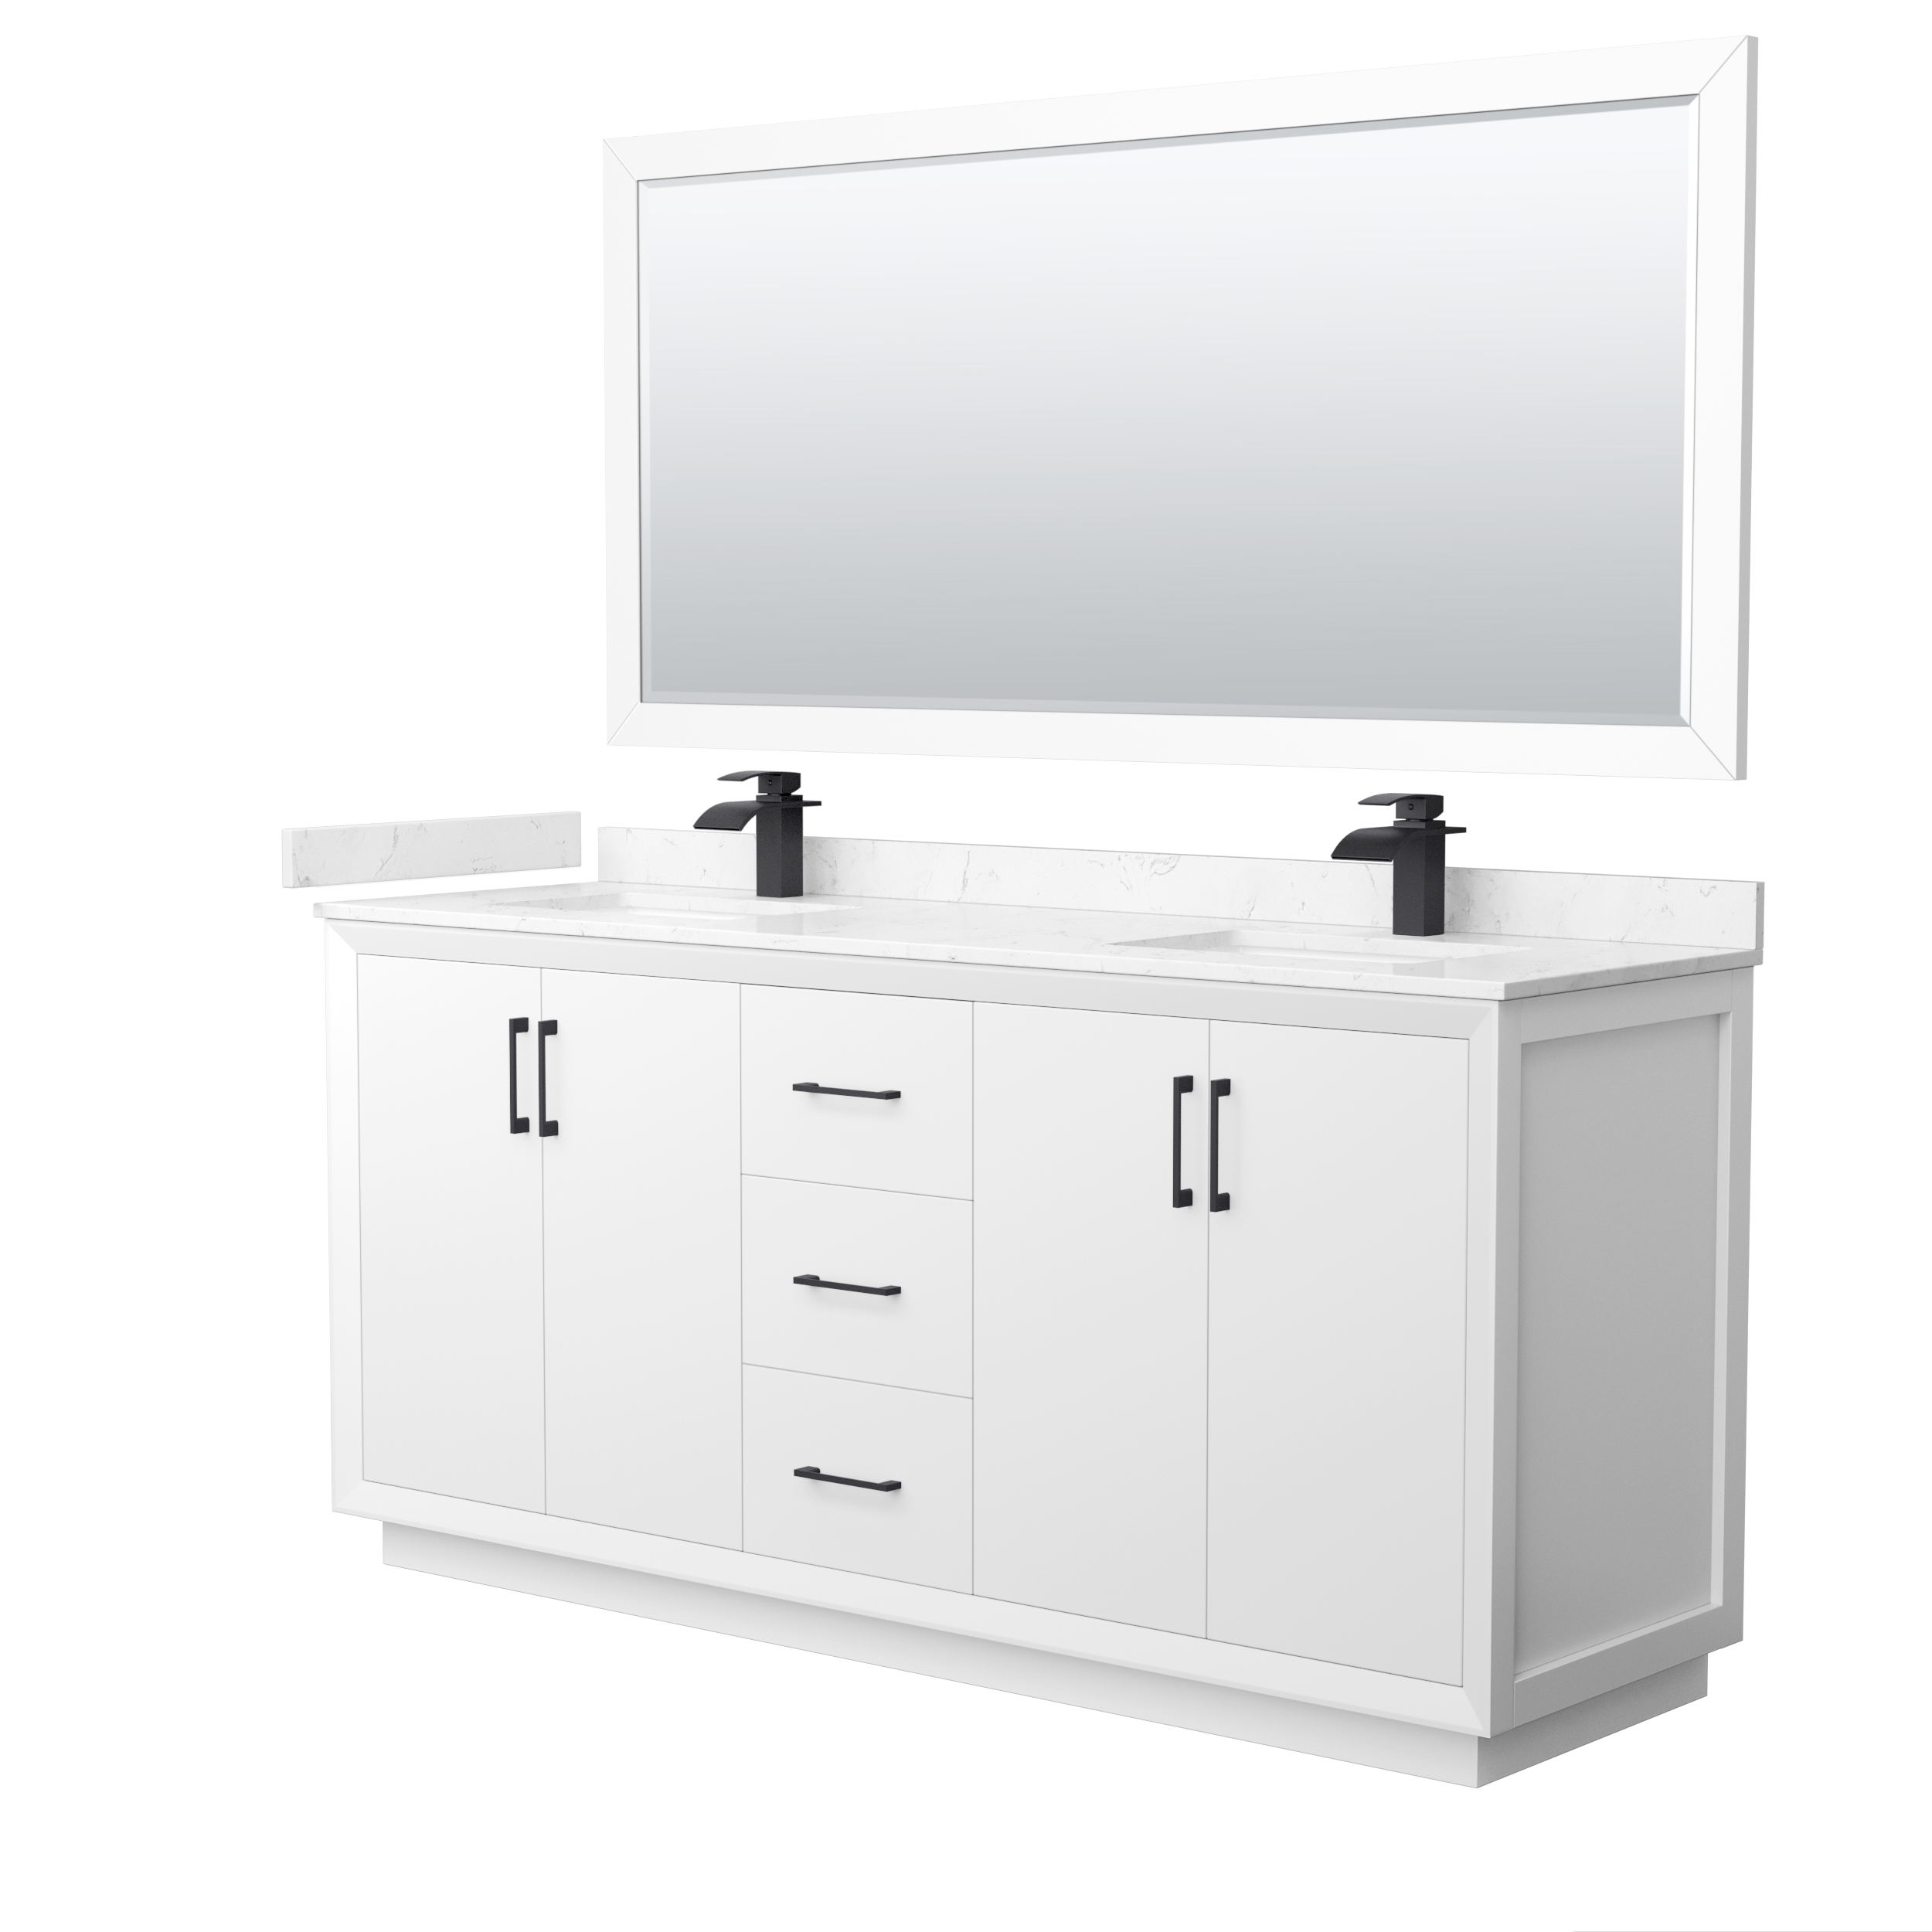 72" Transitional Double Vanity Base in White, 3 Top Options, with 3 Hardware Options and Mirror Option